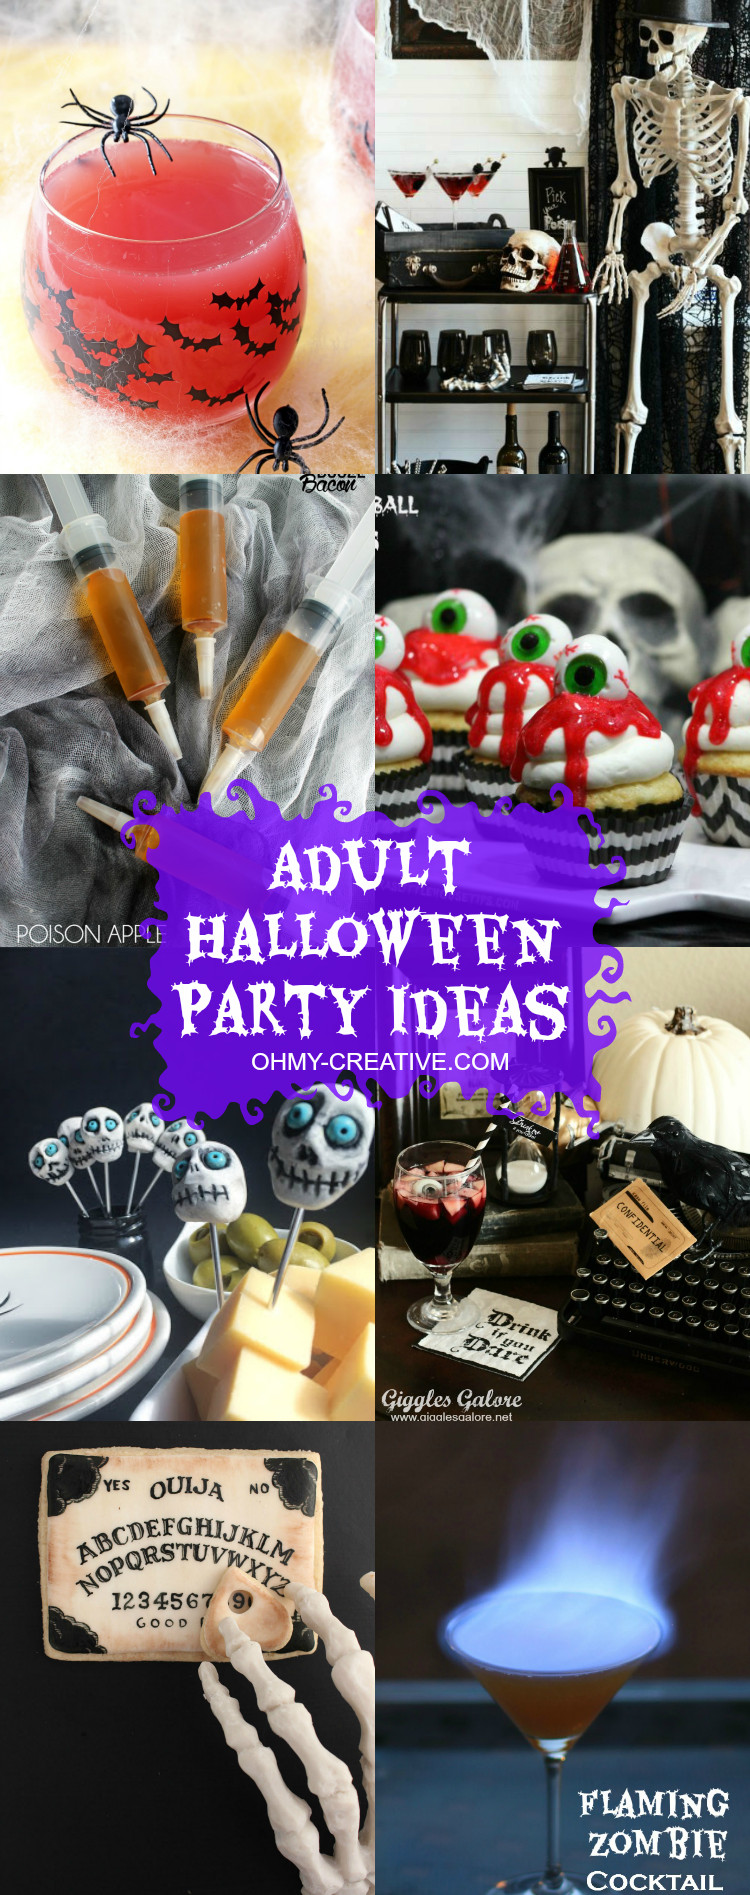 Halloween Party Ideas For Adults Decorations
 Adult Halloween Party Ideas Oh My Creative